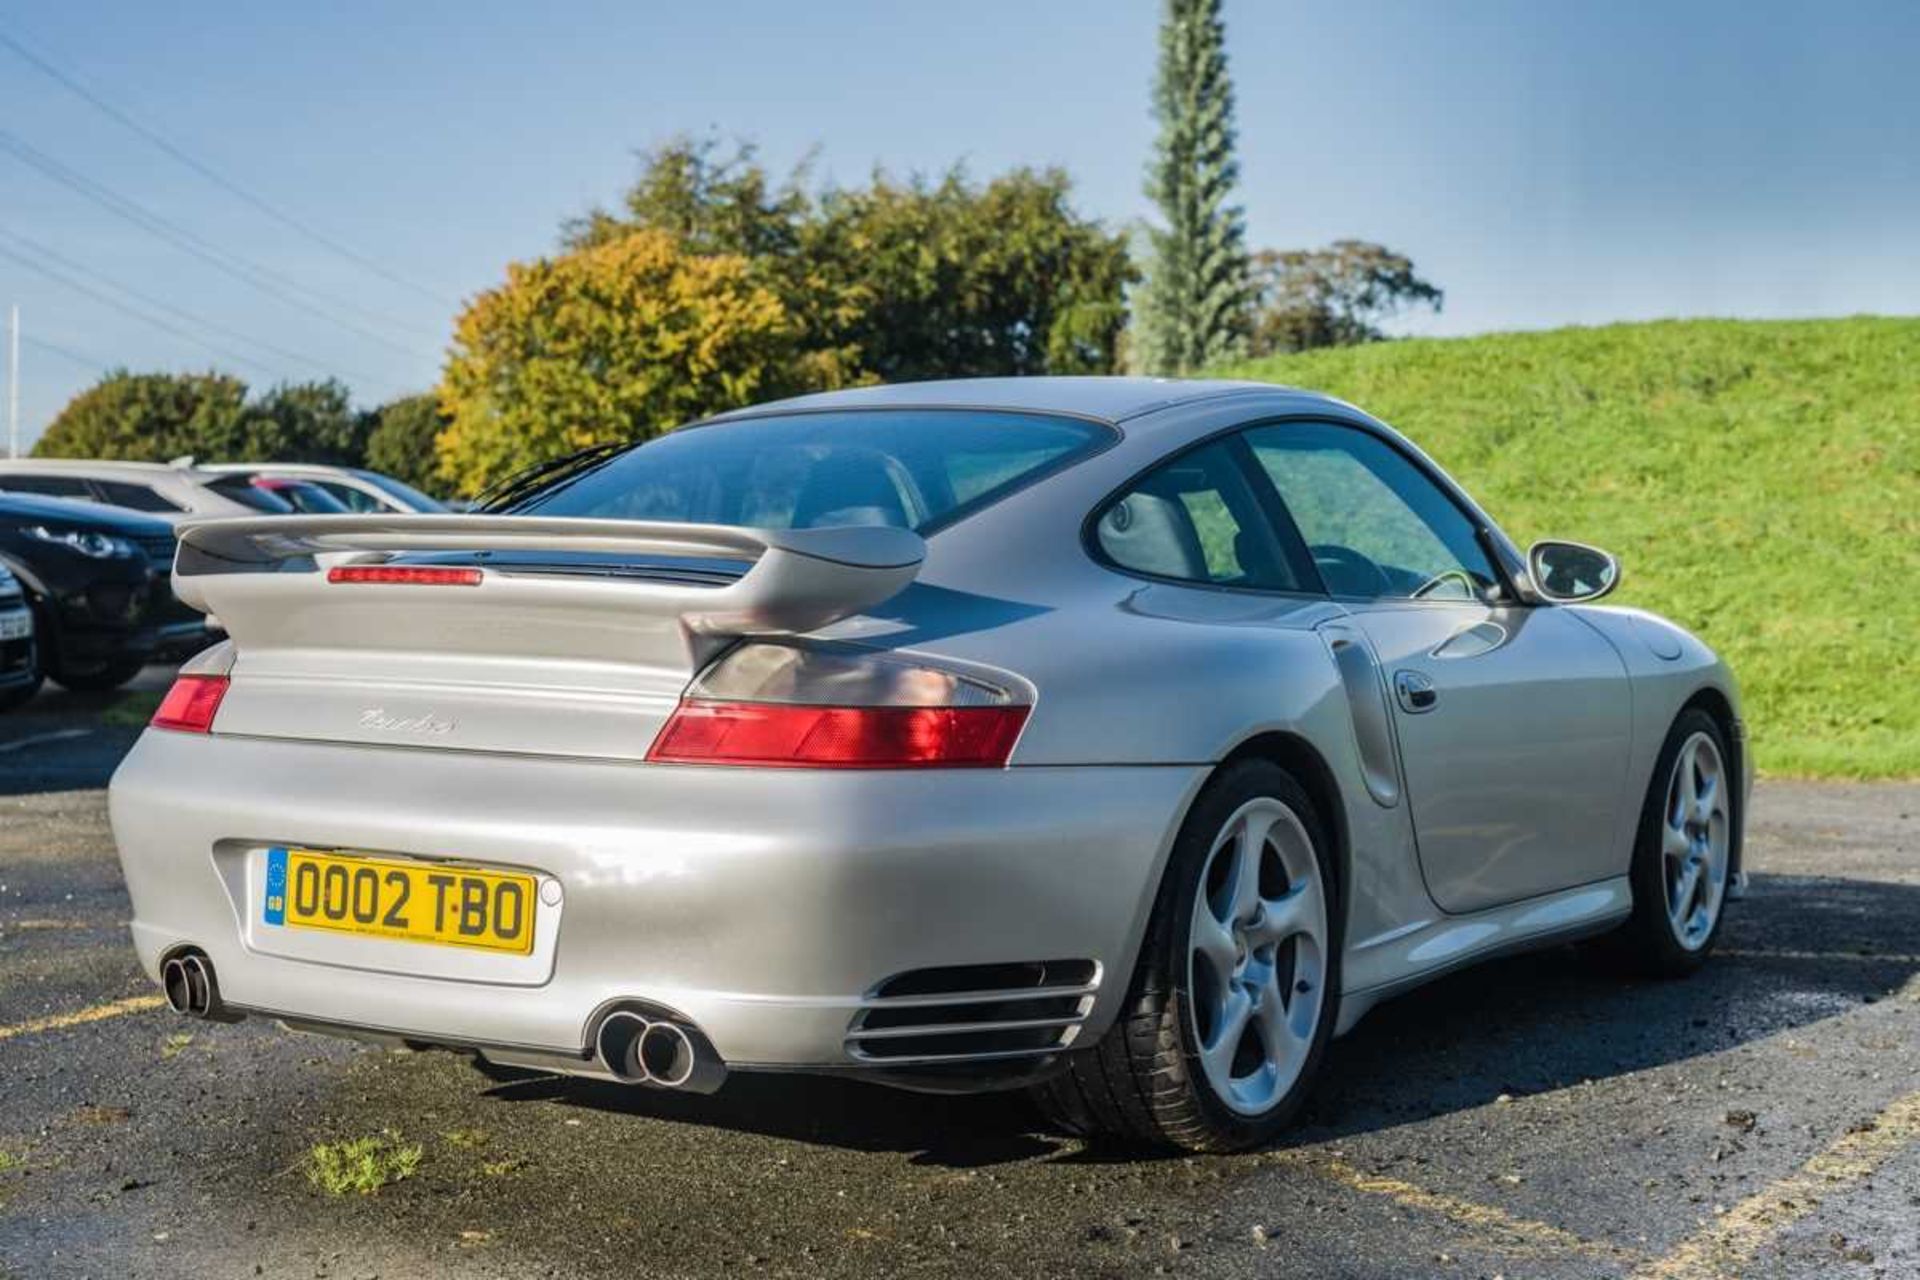 2002 Porsche 911 Turbo Specified with factory Aero-kit, sunroof and manual transmission  - Image 8 of 58